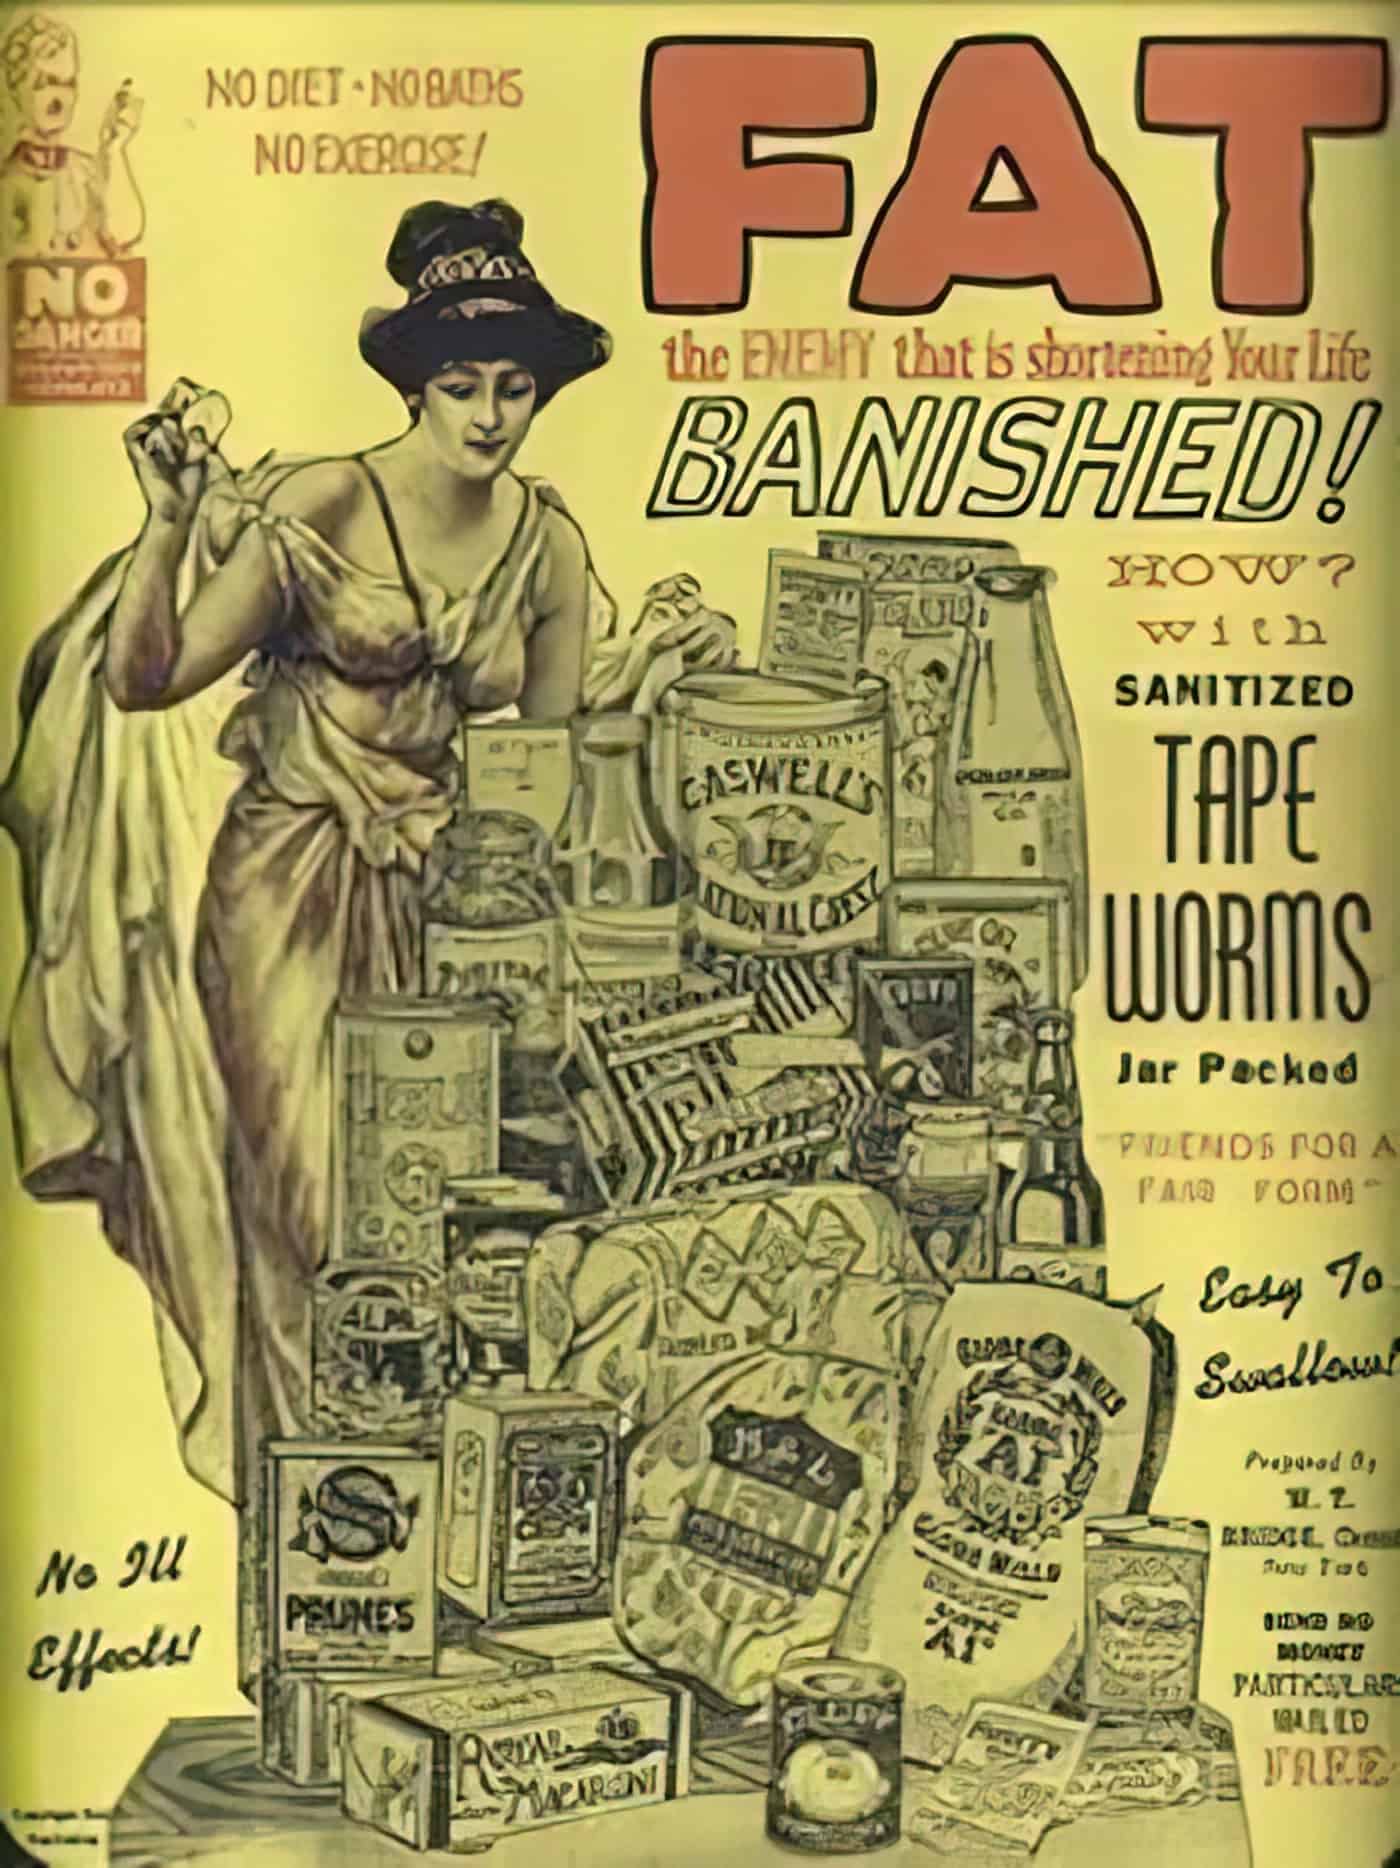 Sanitized Tapeworms Ad